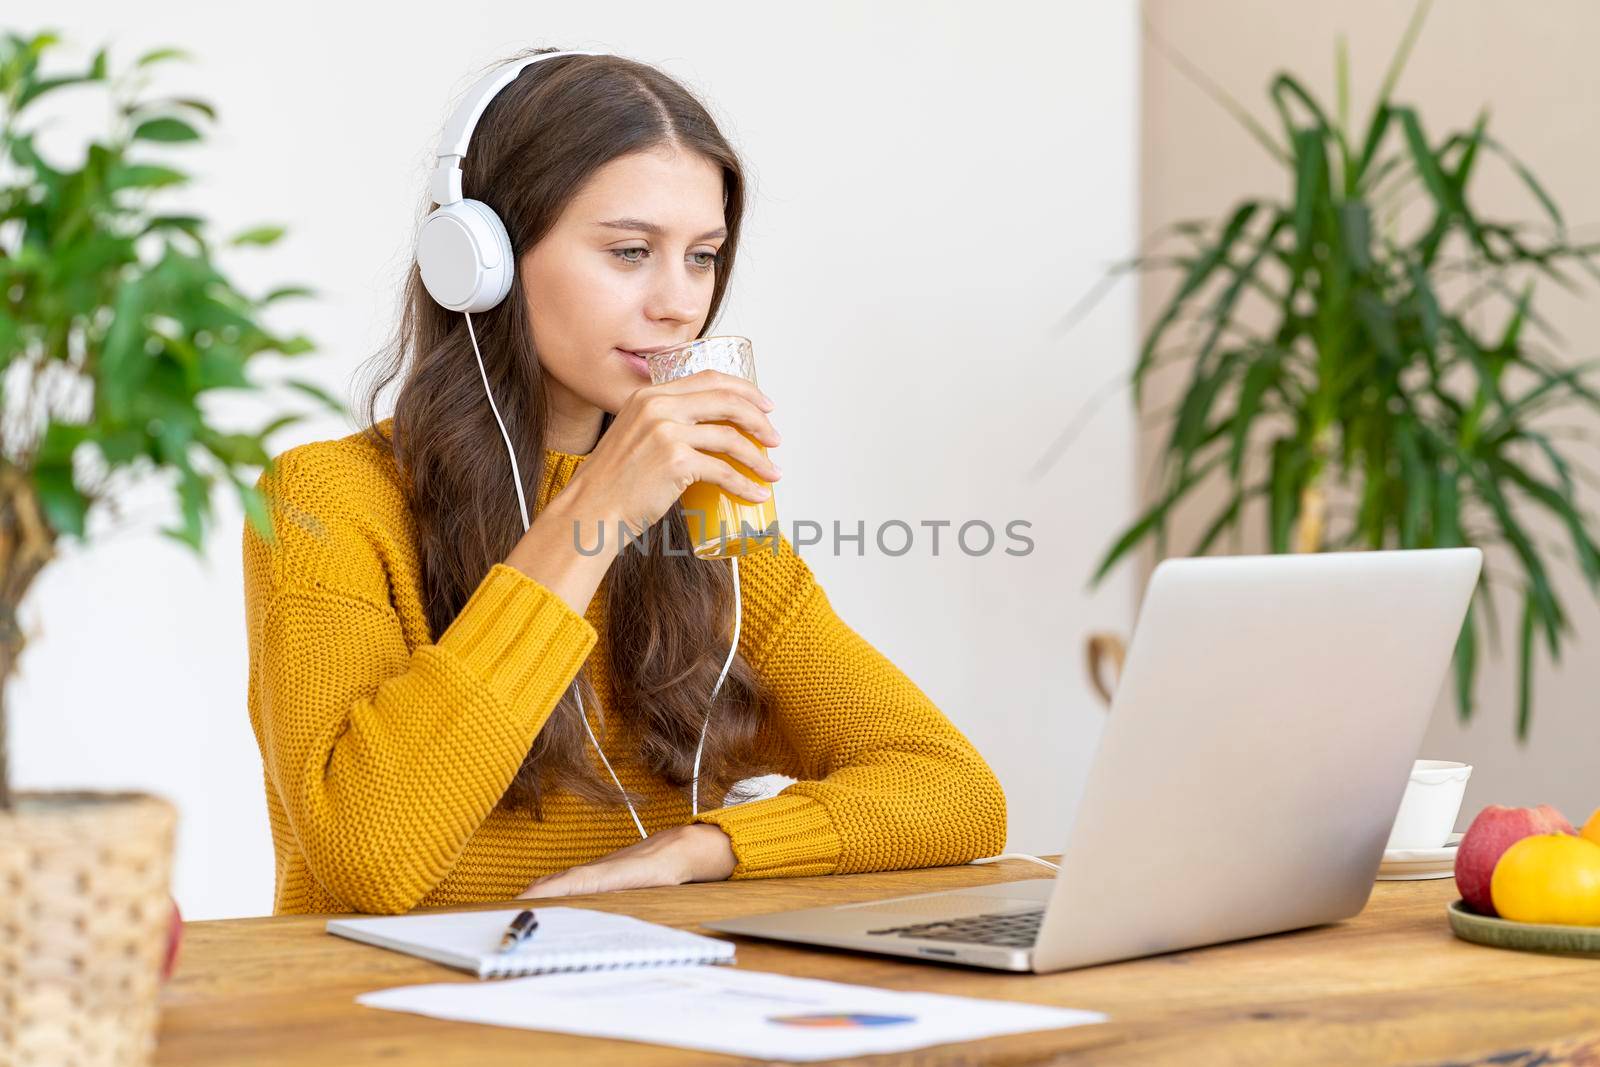 Young girl with headphones talking on conference calls,drinking orange juice, smiling by NataBene